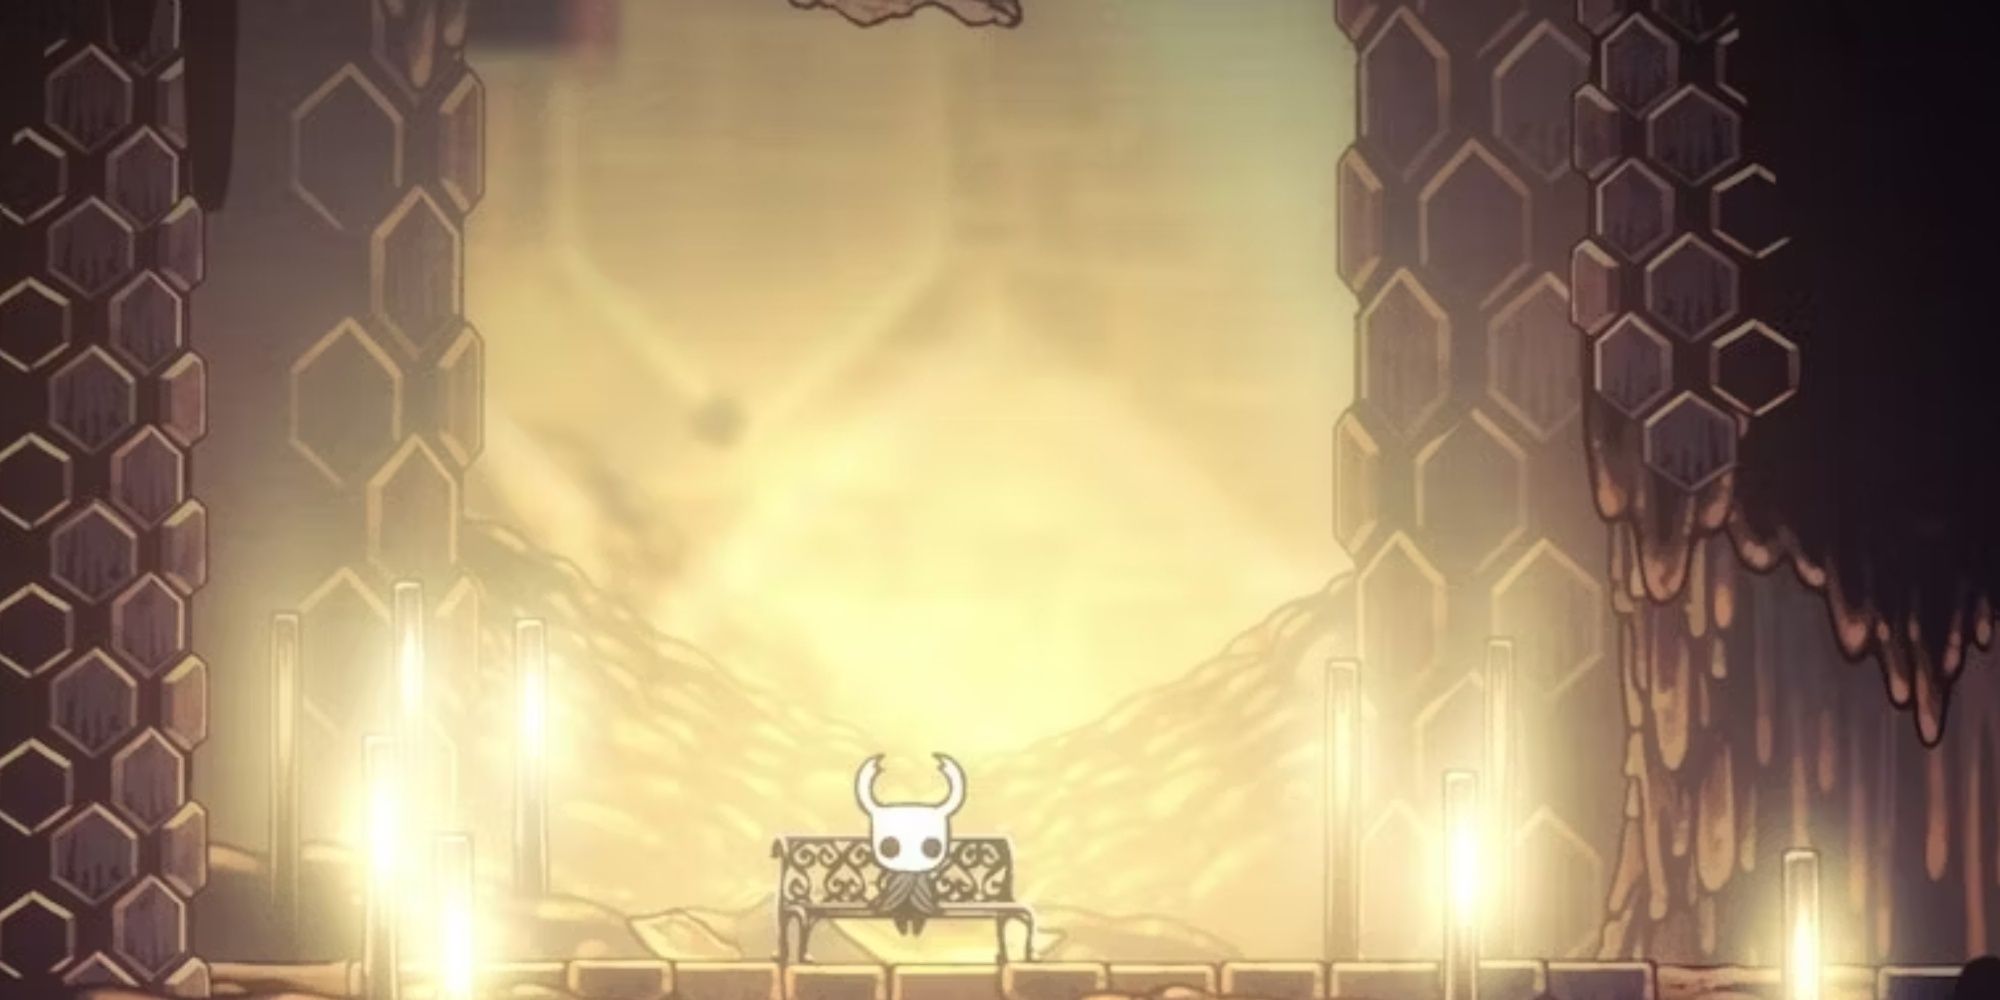 The Knight sat on a bench in the Hive in Hollow Knight